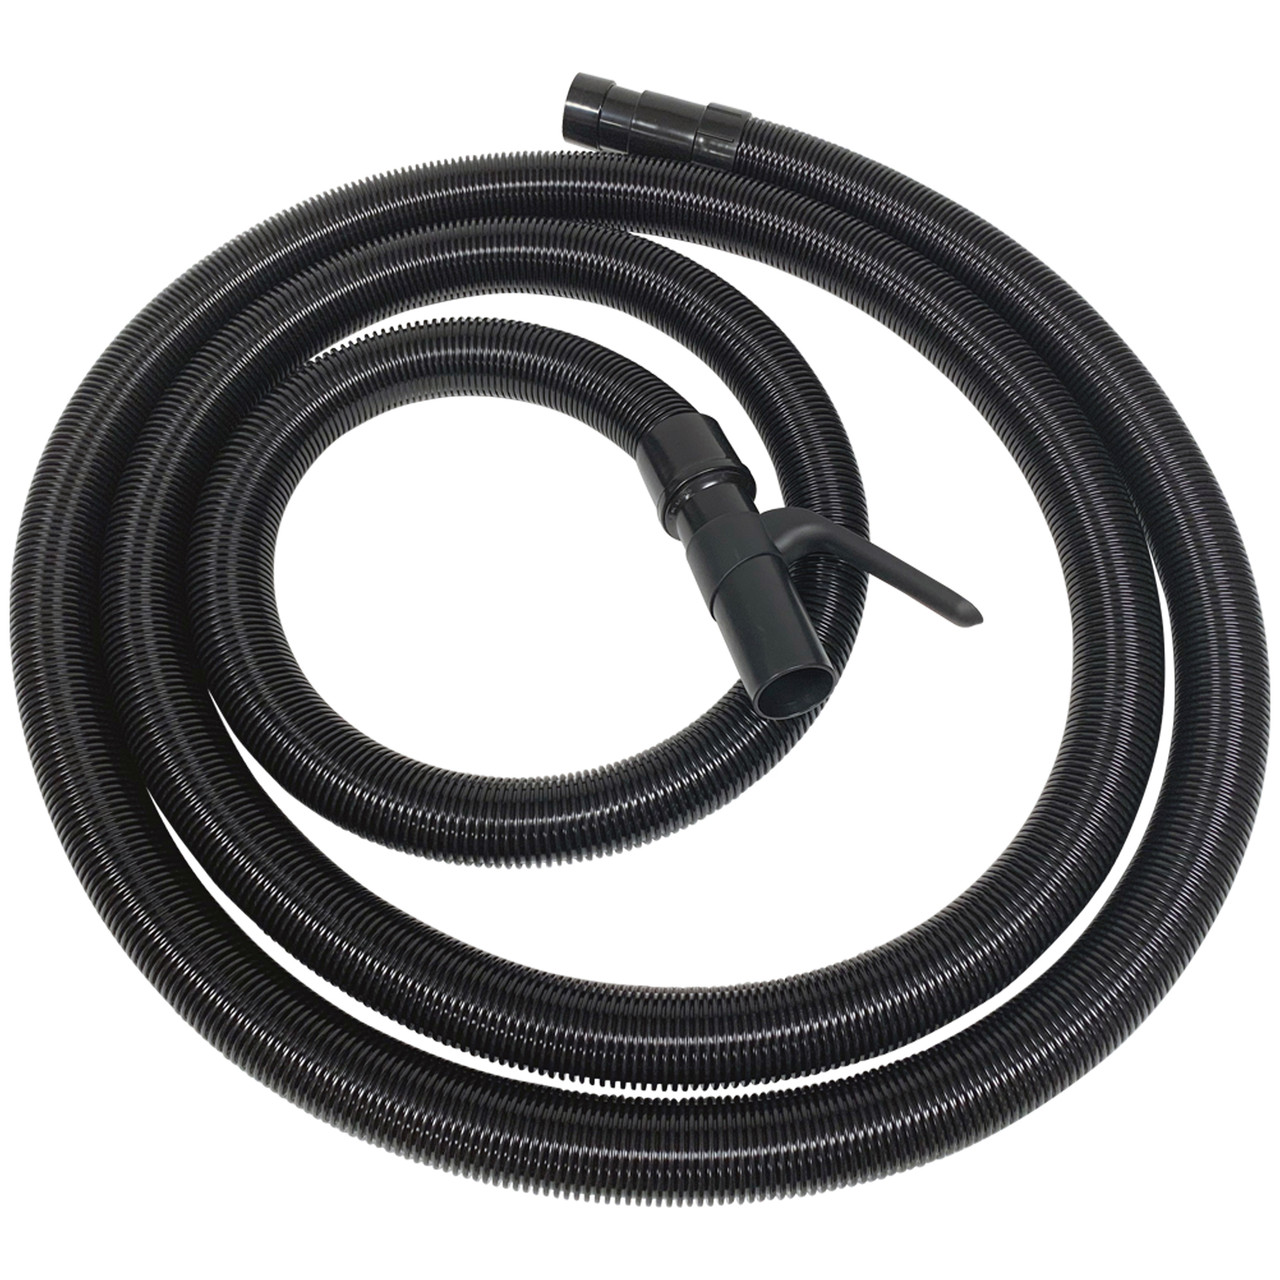 2 Shop-Vac, Craftsman & Ridgid 20FT Foot Hose Fits Wet & Dry Vacs with  2-1/4 Inch Cuff